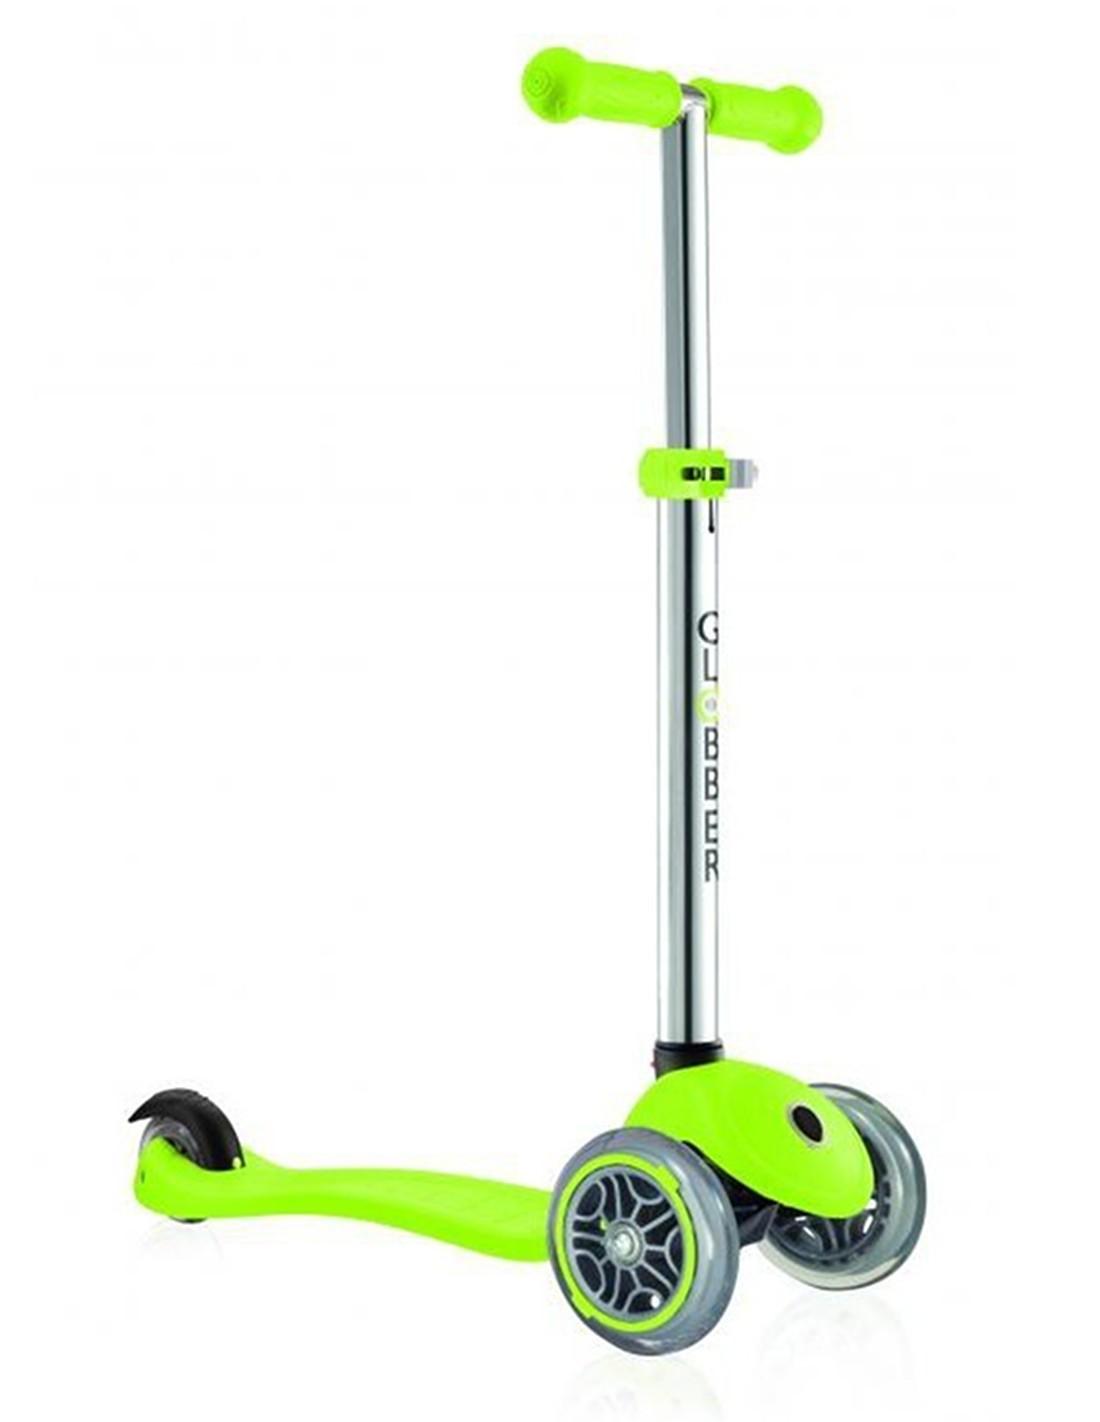 PRIMO - 3 Wheel Scooter for Kids - neon green - MoonyBoon